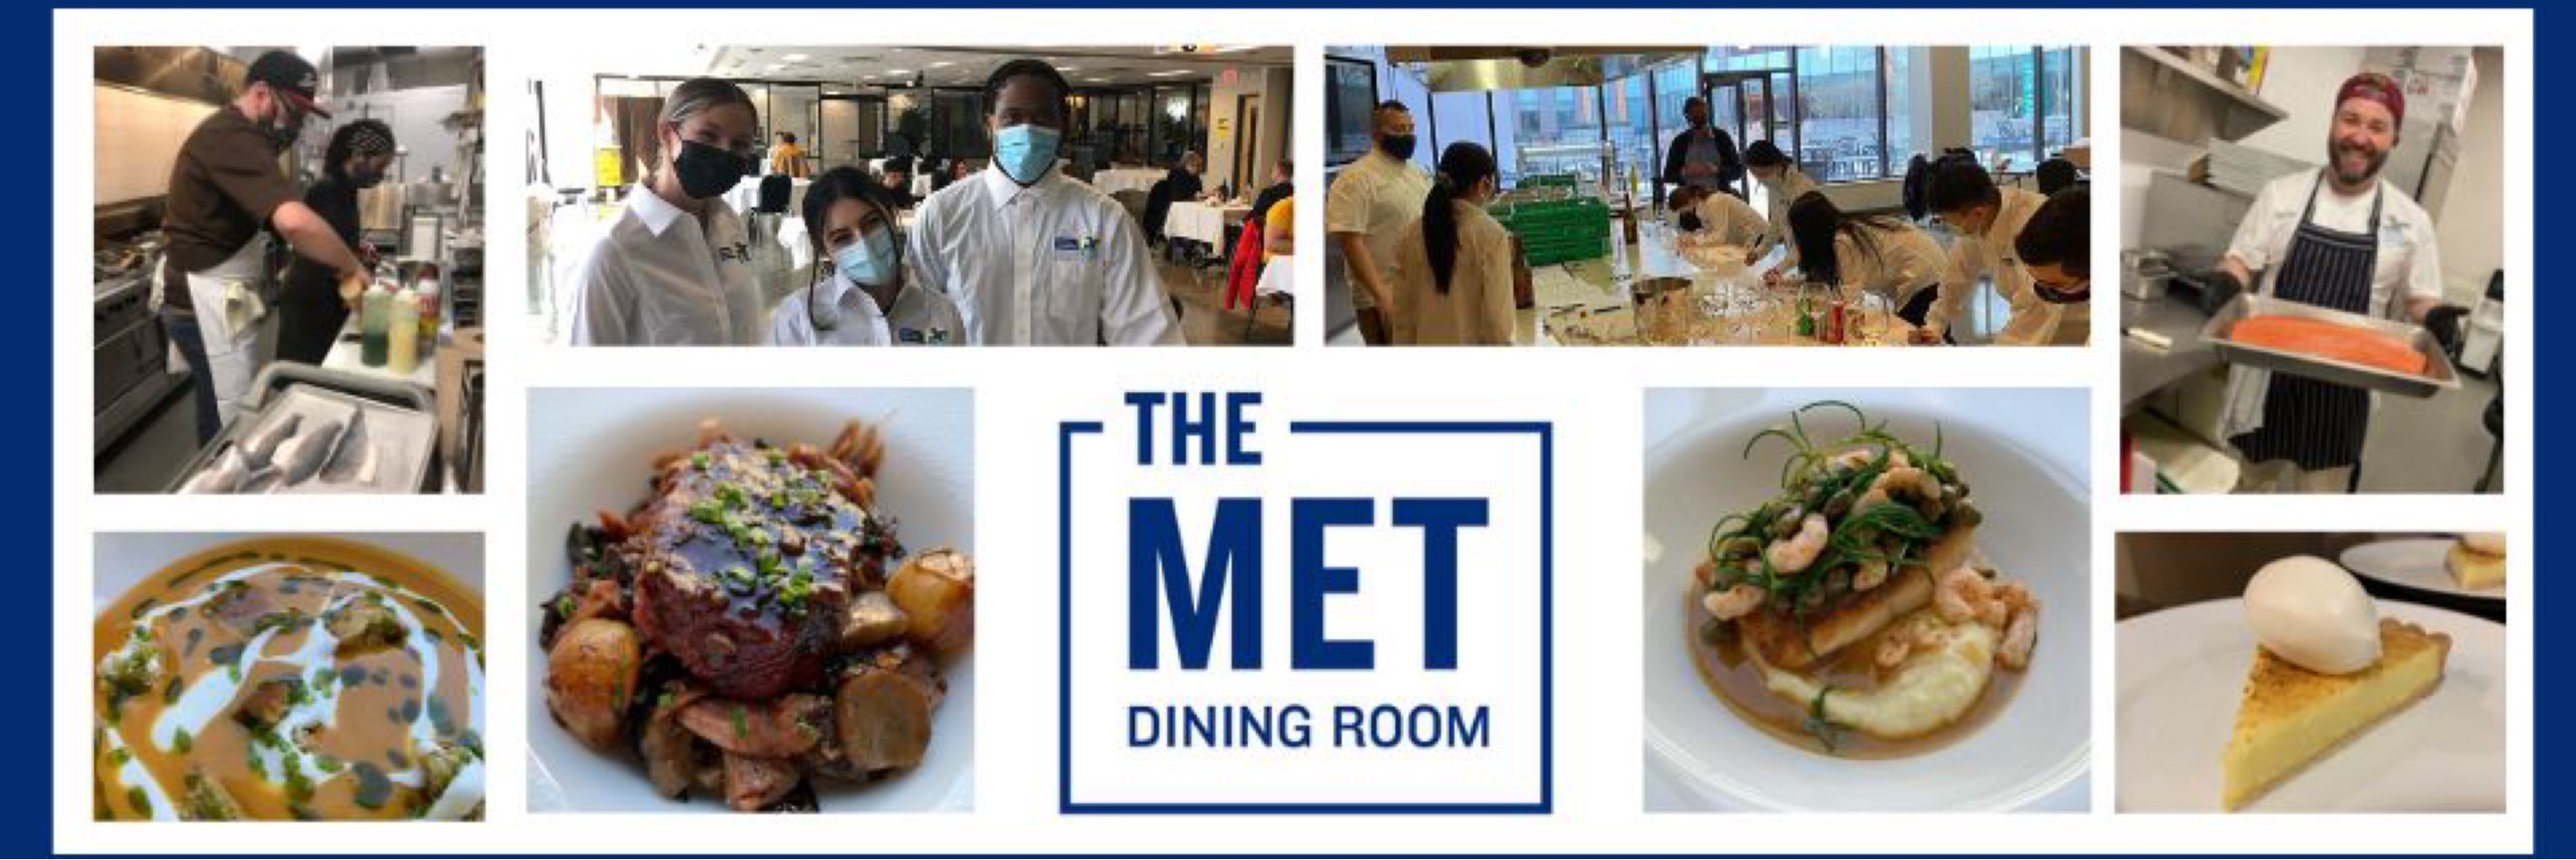 The Met Dining Room Cancel Reservation